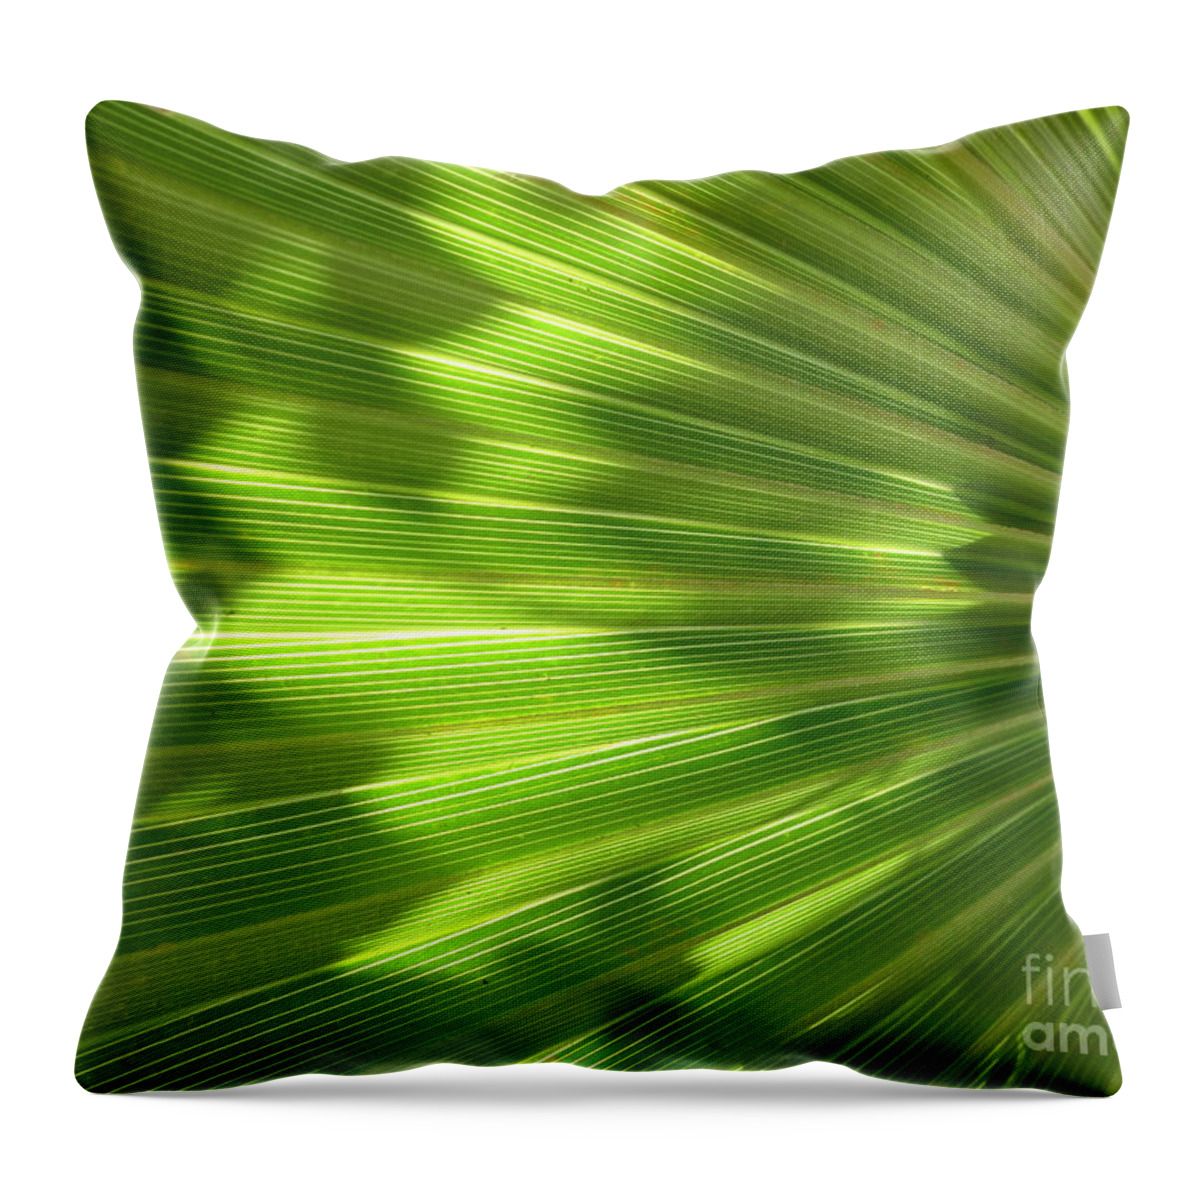  Throw Pillow featuring the photograph Palm Leaf by Nora Boghossian